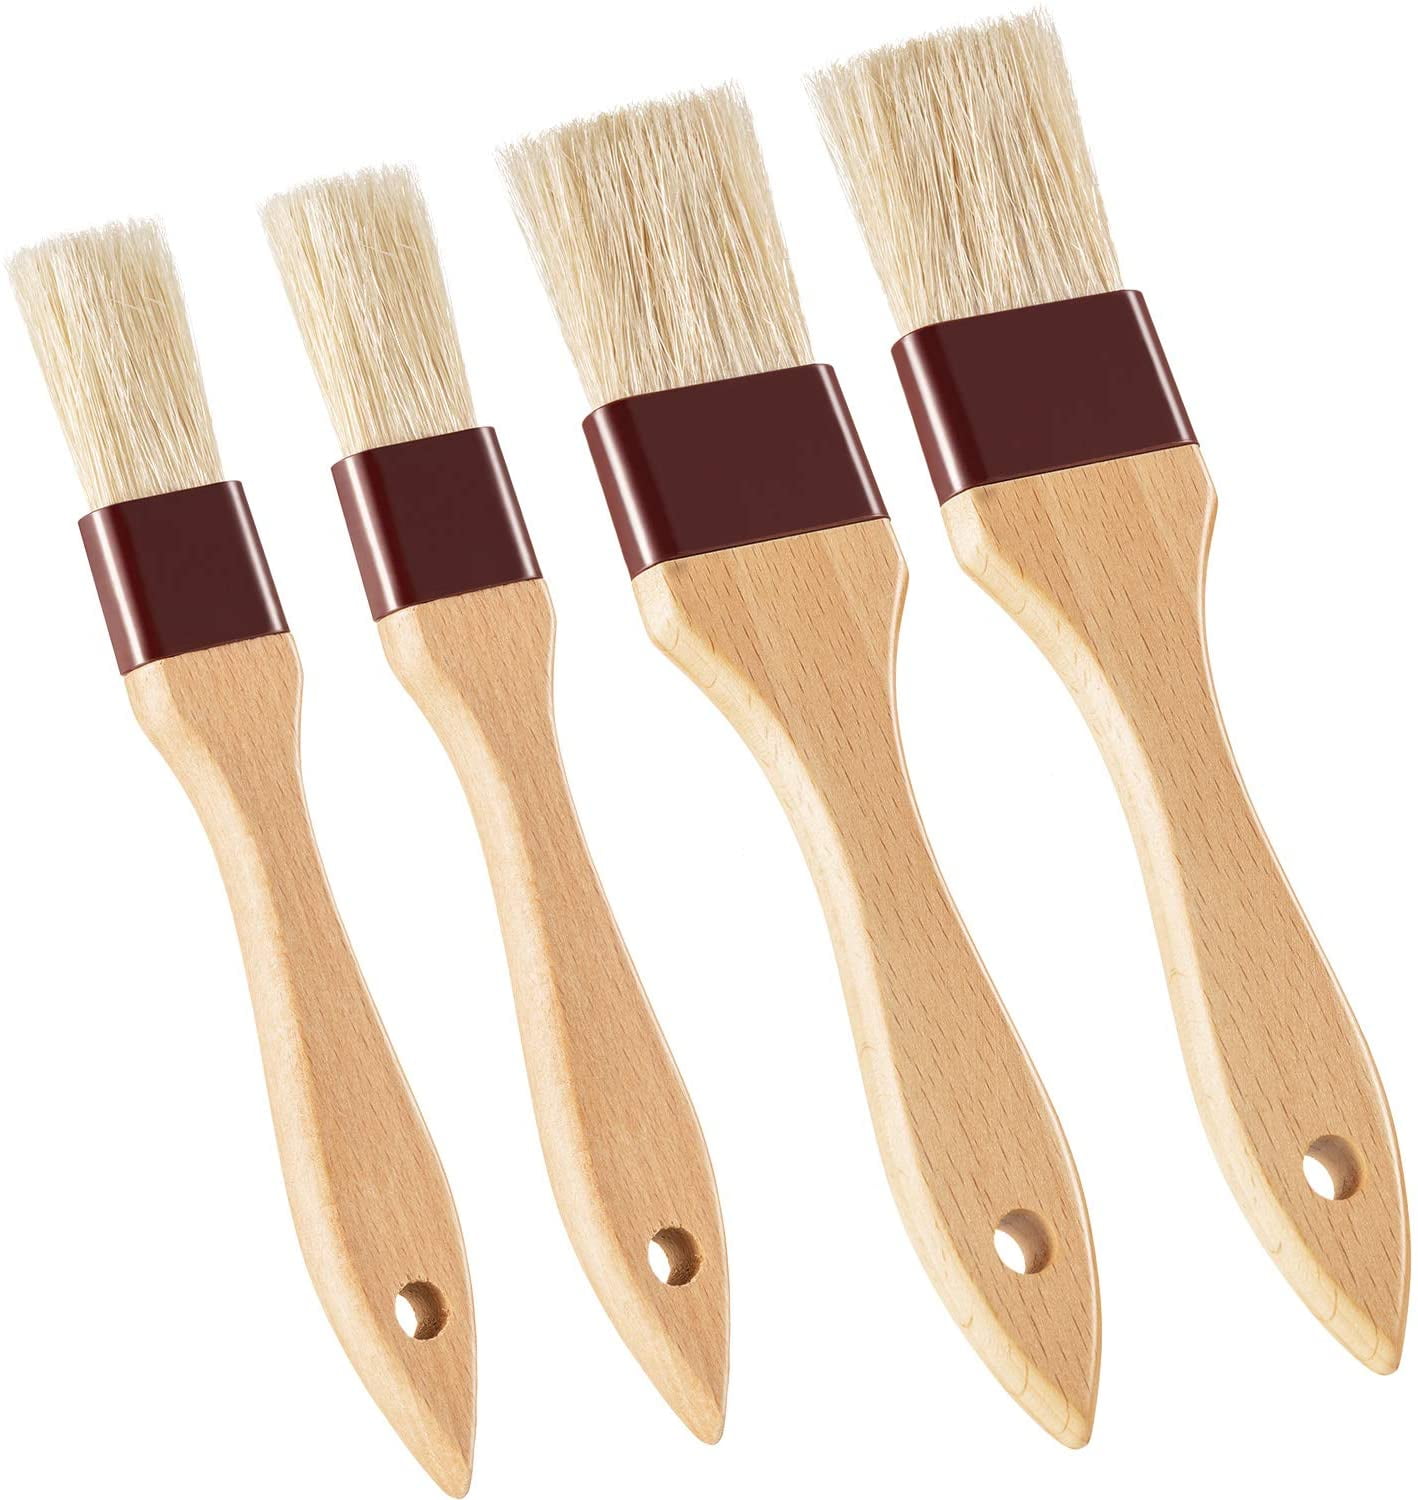 4 Pieces Pastry Brushes Basting Oil Brush with Boar Bristles and